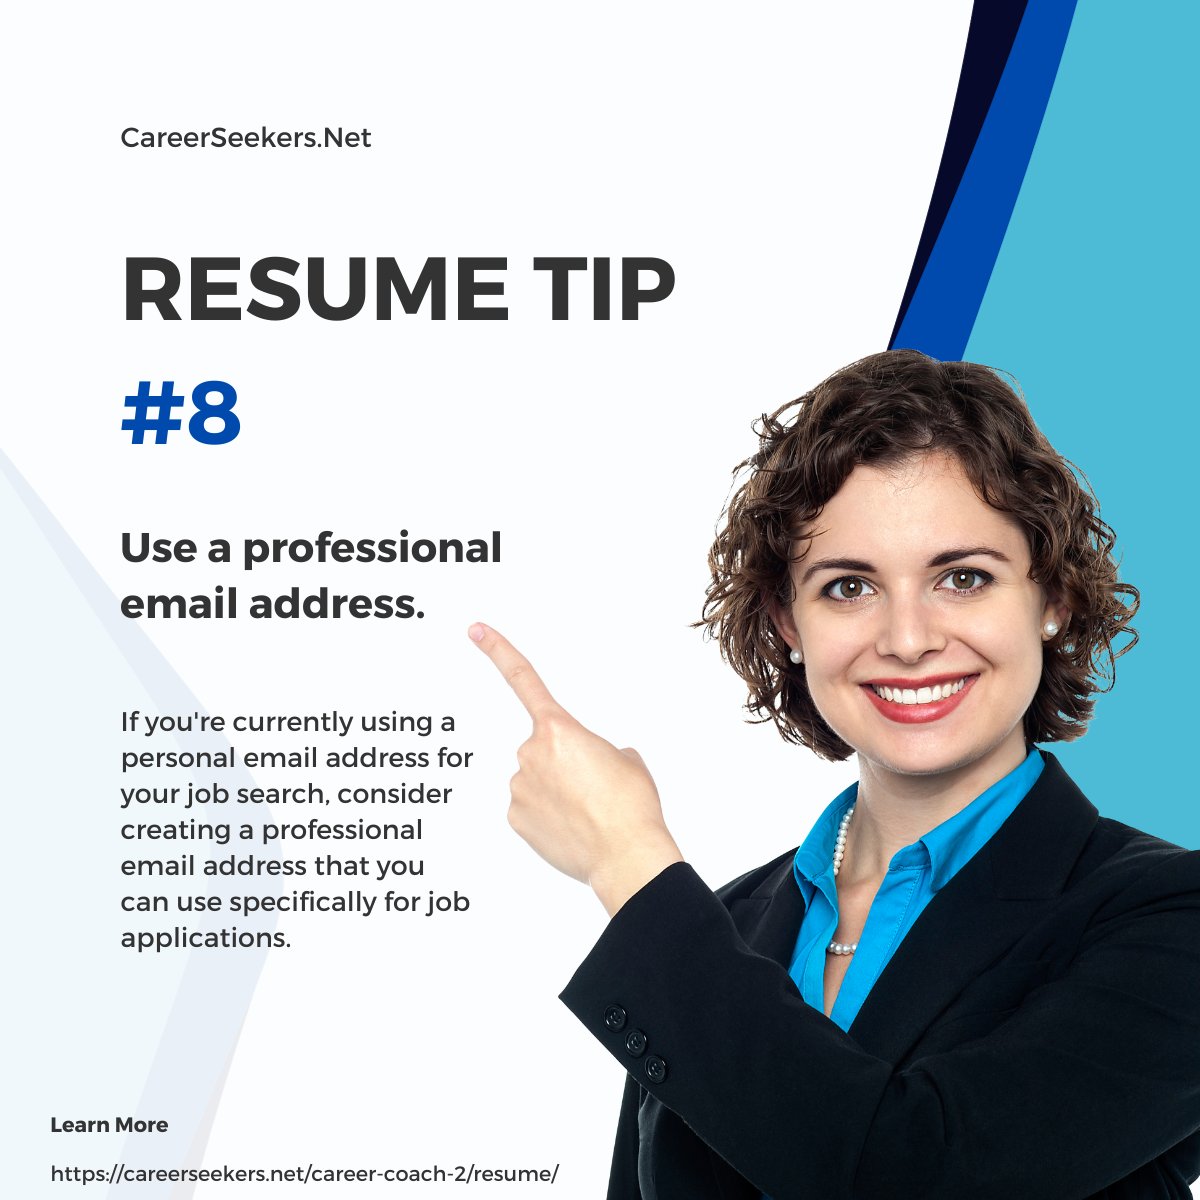 For more tips on how to write your resume to get job interviews 👉👉 careerseekers.net/career-coach-2…
#ResumeTips #JobHunt #CareerAdvice